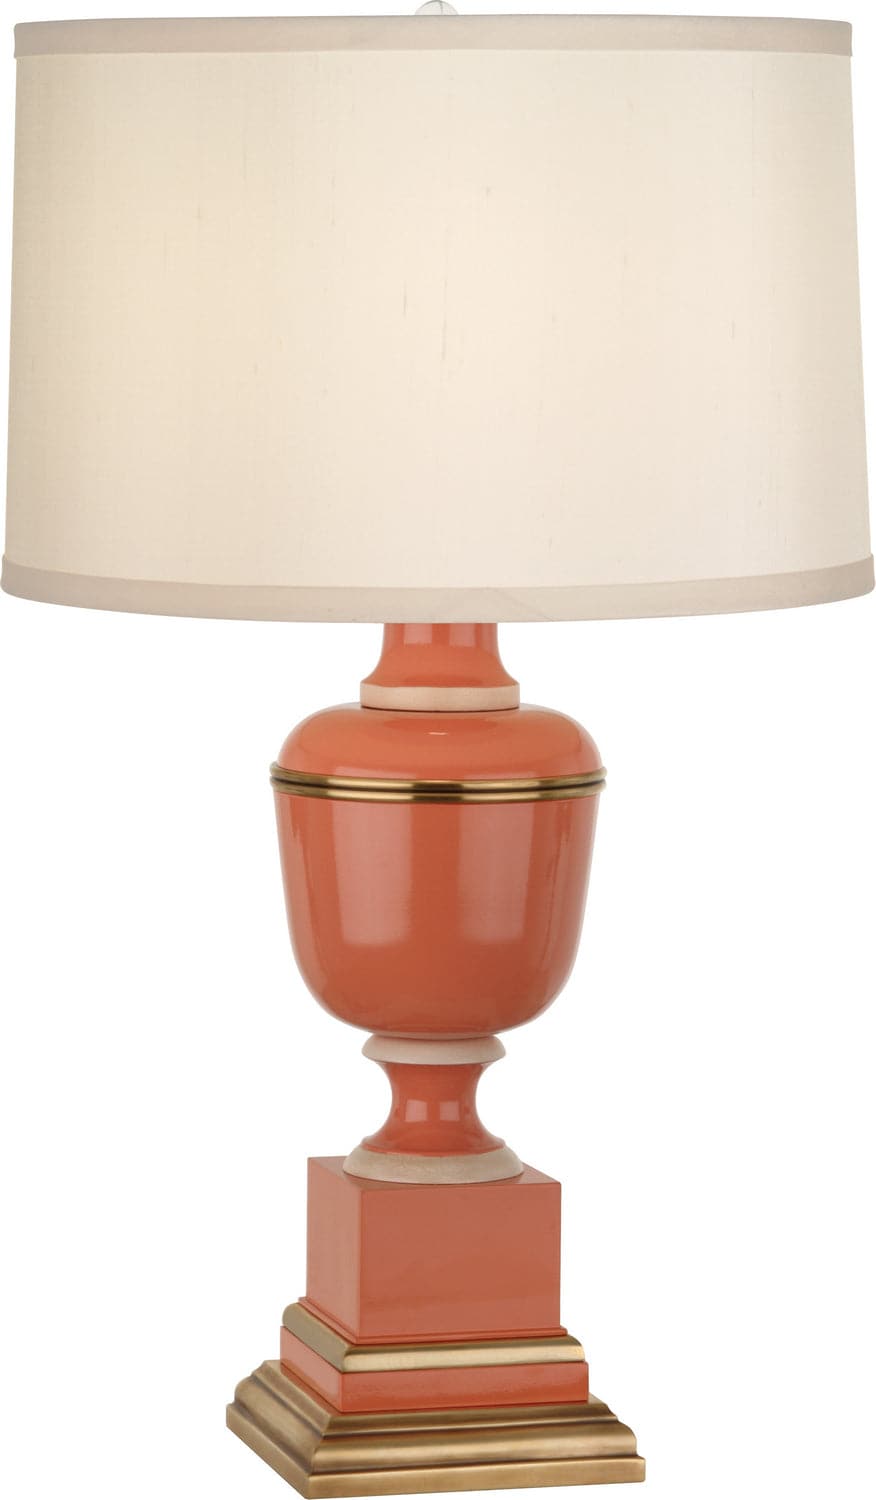 Robert Abbey - 2603X - One Light Accent Lamp - Annika - Tangerine Lacquered Paint and Natural Brass w/Ivory Crackle